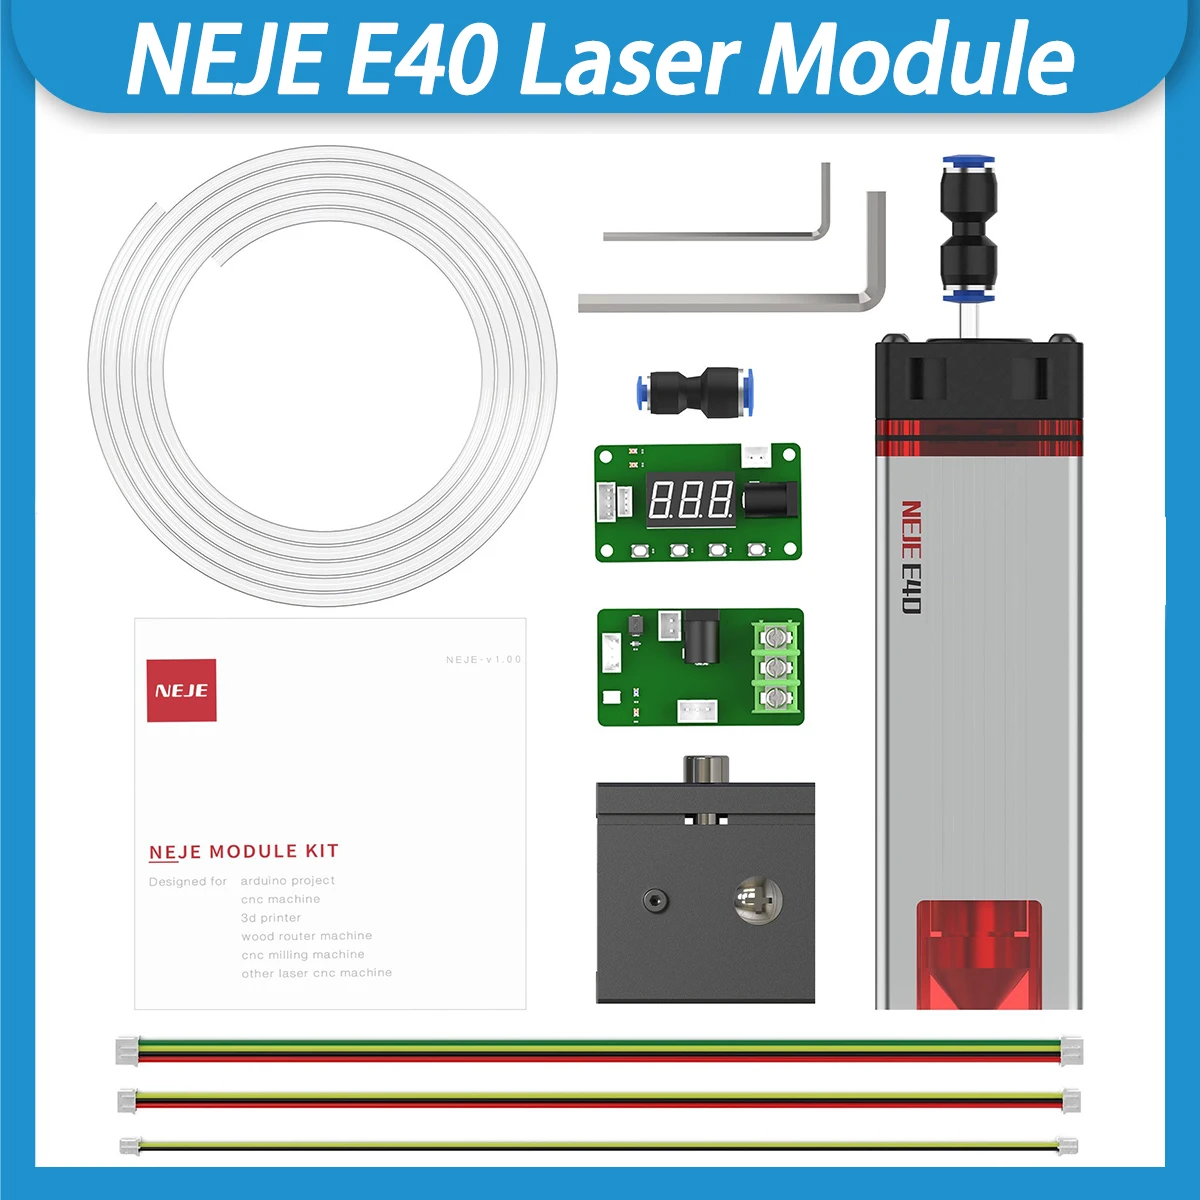 NEJE E40 Laser 11W+ OUTPUT Fixed-Focus Laser Module For CUTTING and CARVING 2 BEAM BUILT-IN HIGH PRESSURE AIR ASSIST